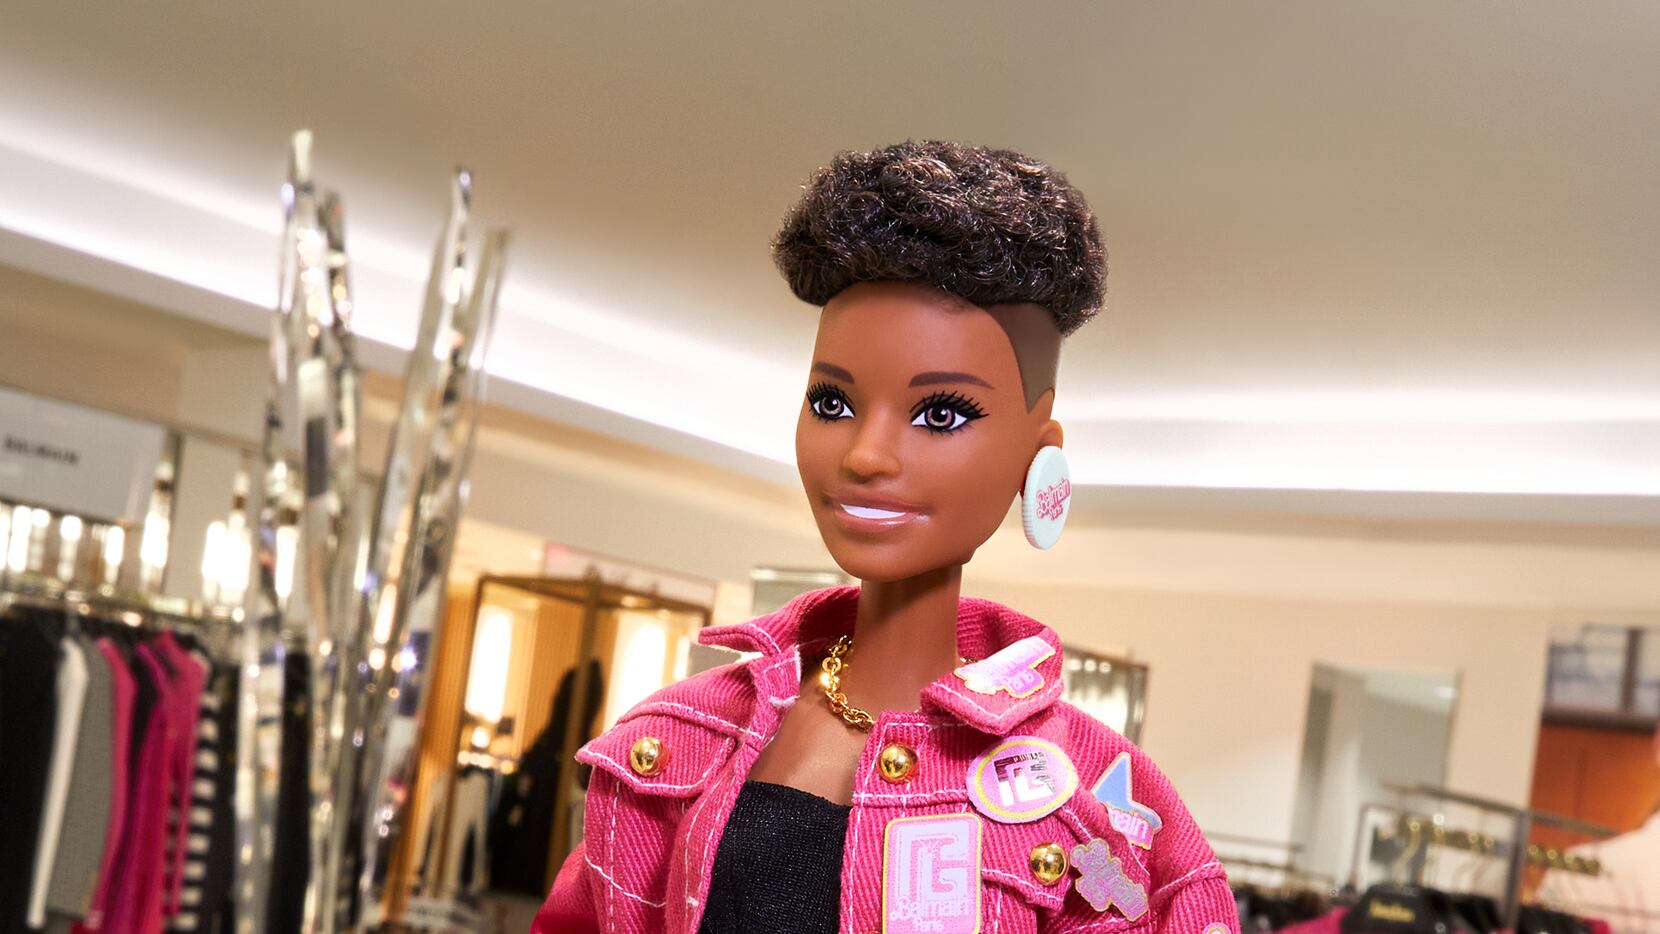 Balmain Meets Barbie in Neiman Marcus' Fantastical Dallas Pop-Up — The Only  Shopping Experience Like It in the Country